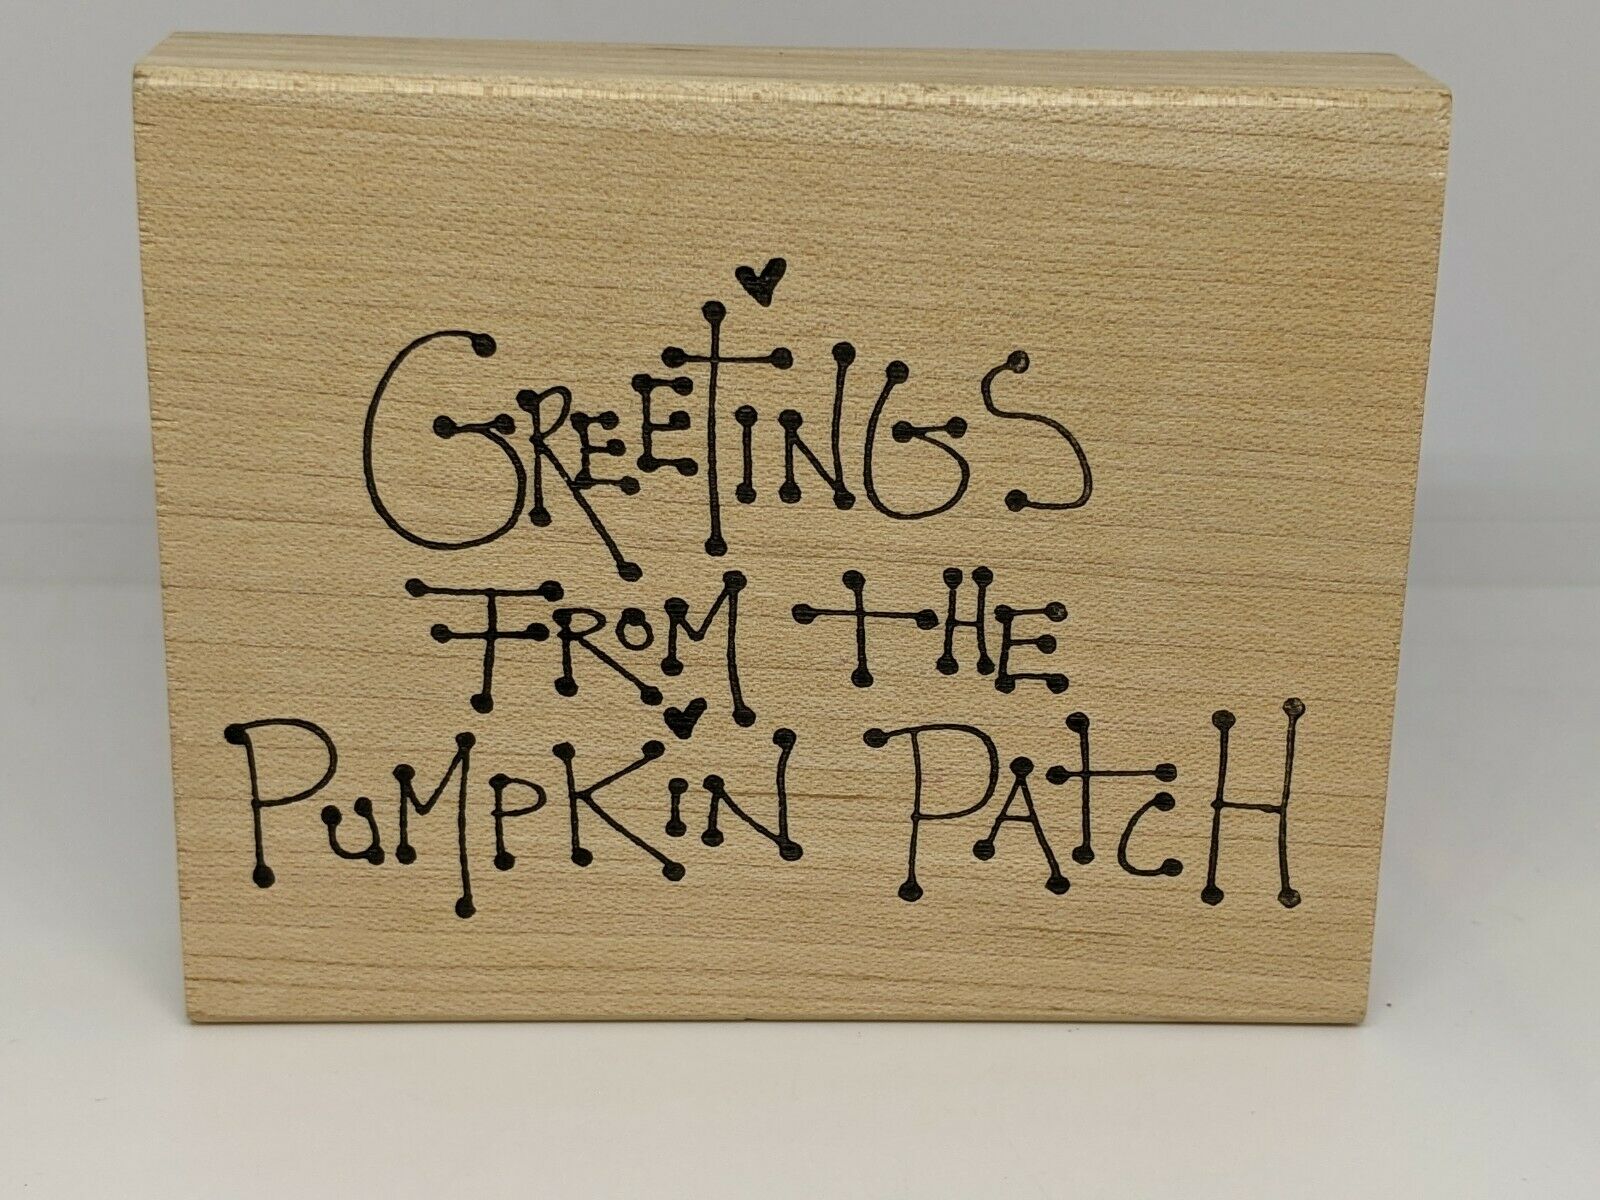 Greetings From The Pumpkin Patch  - Wood / Rubber Stamp  By Judith 3.5 X 2.75